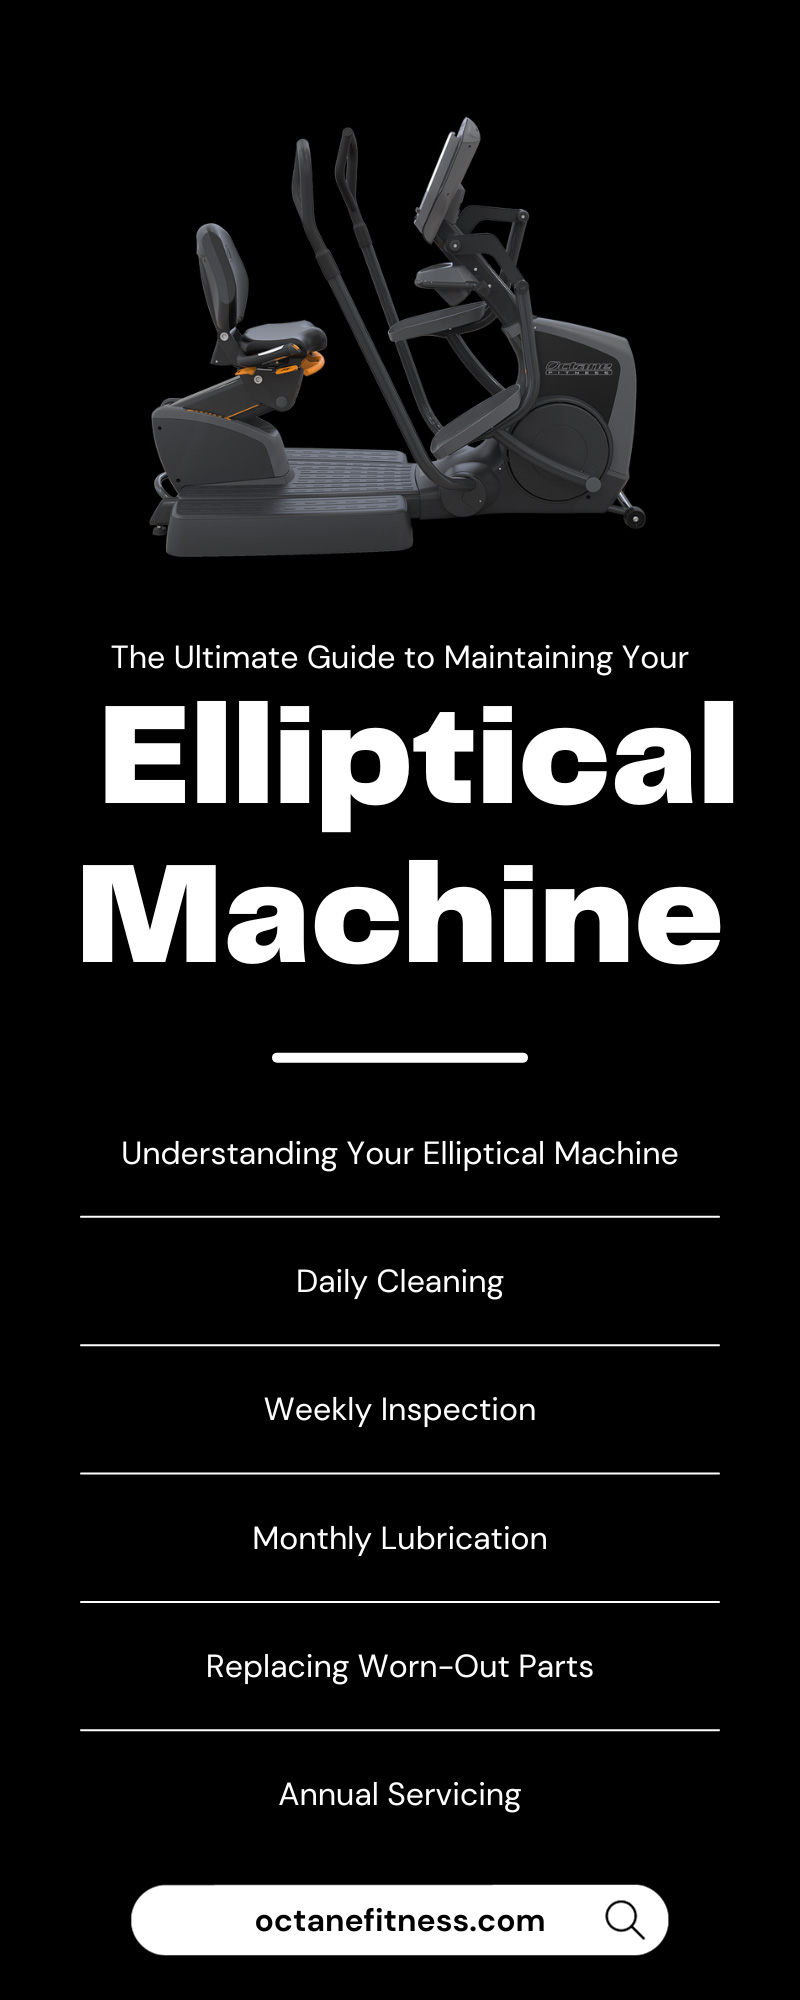 The Ultimate Guide to Maintaining Your Elliptical Machine